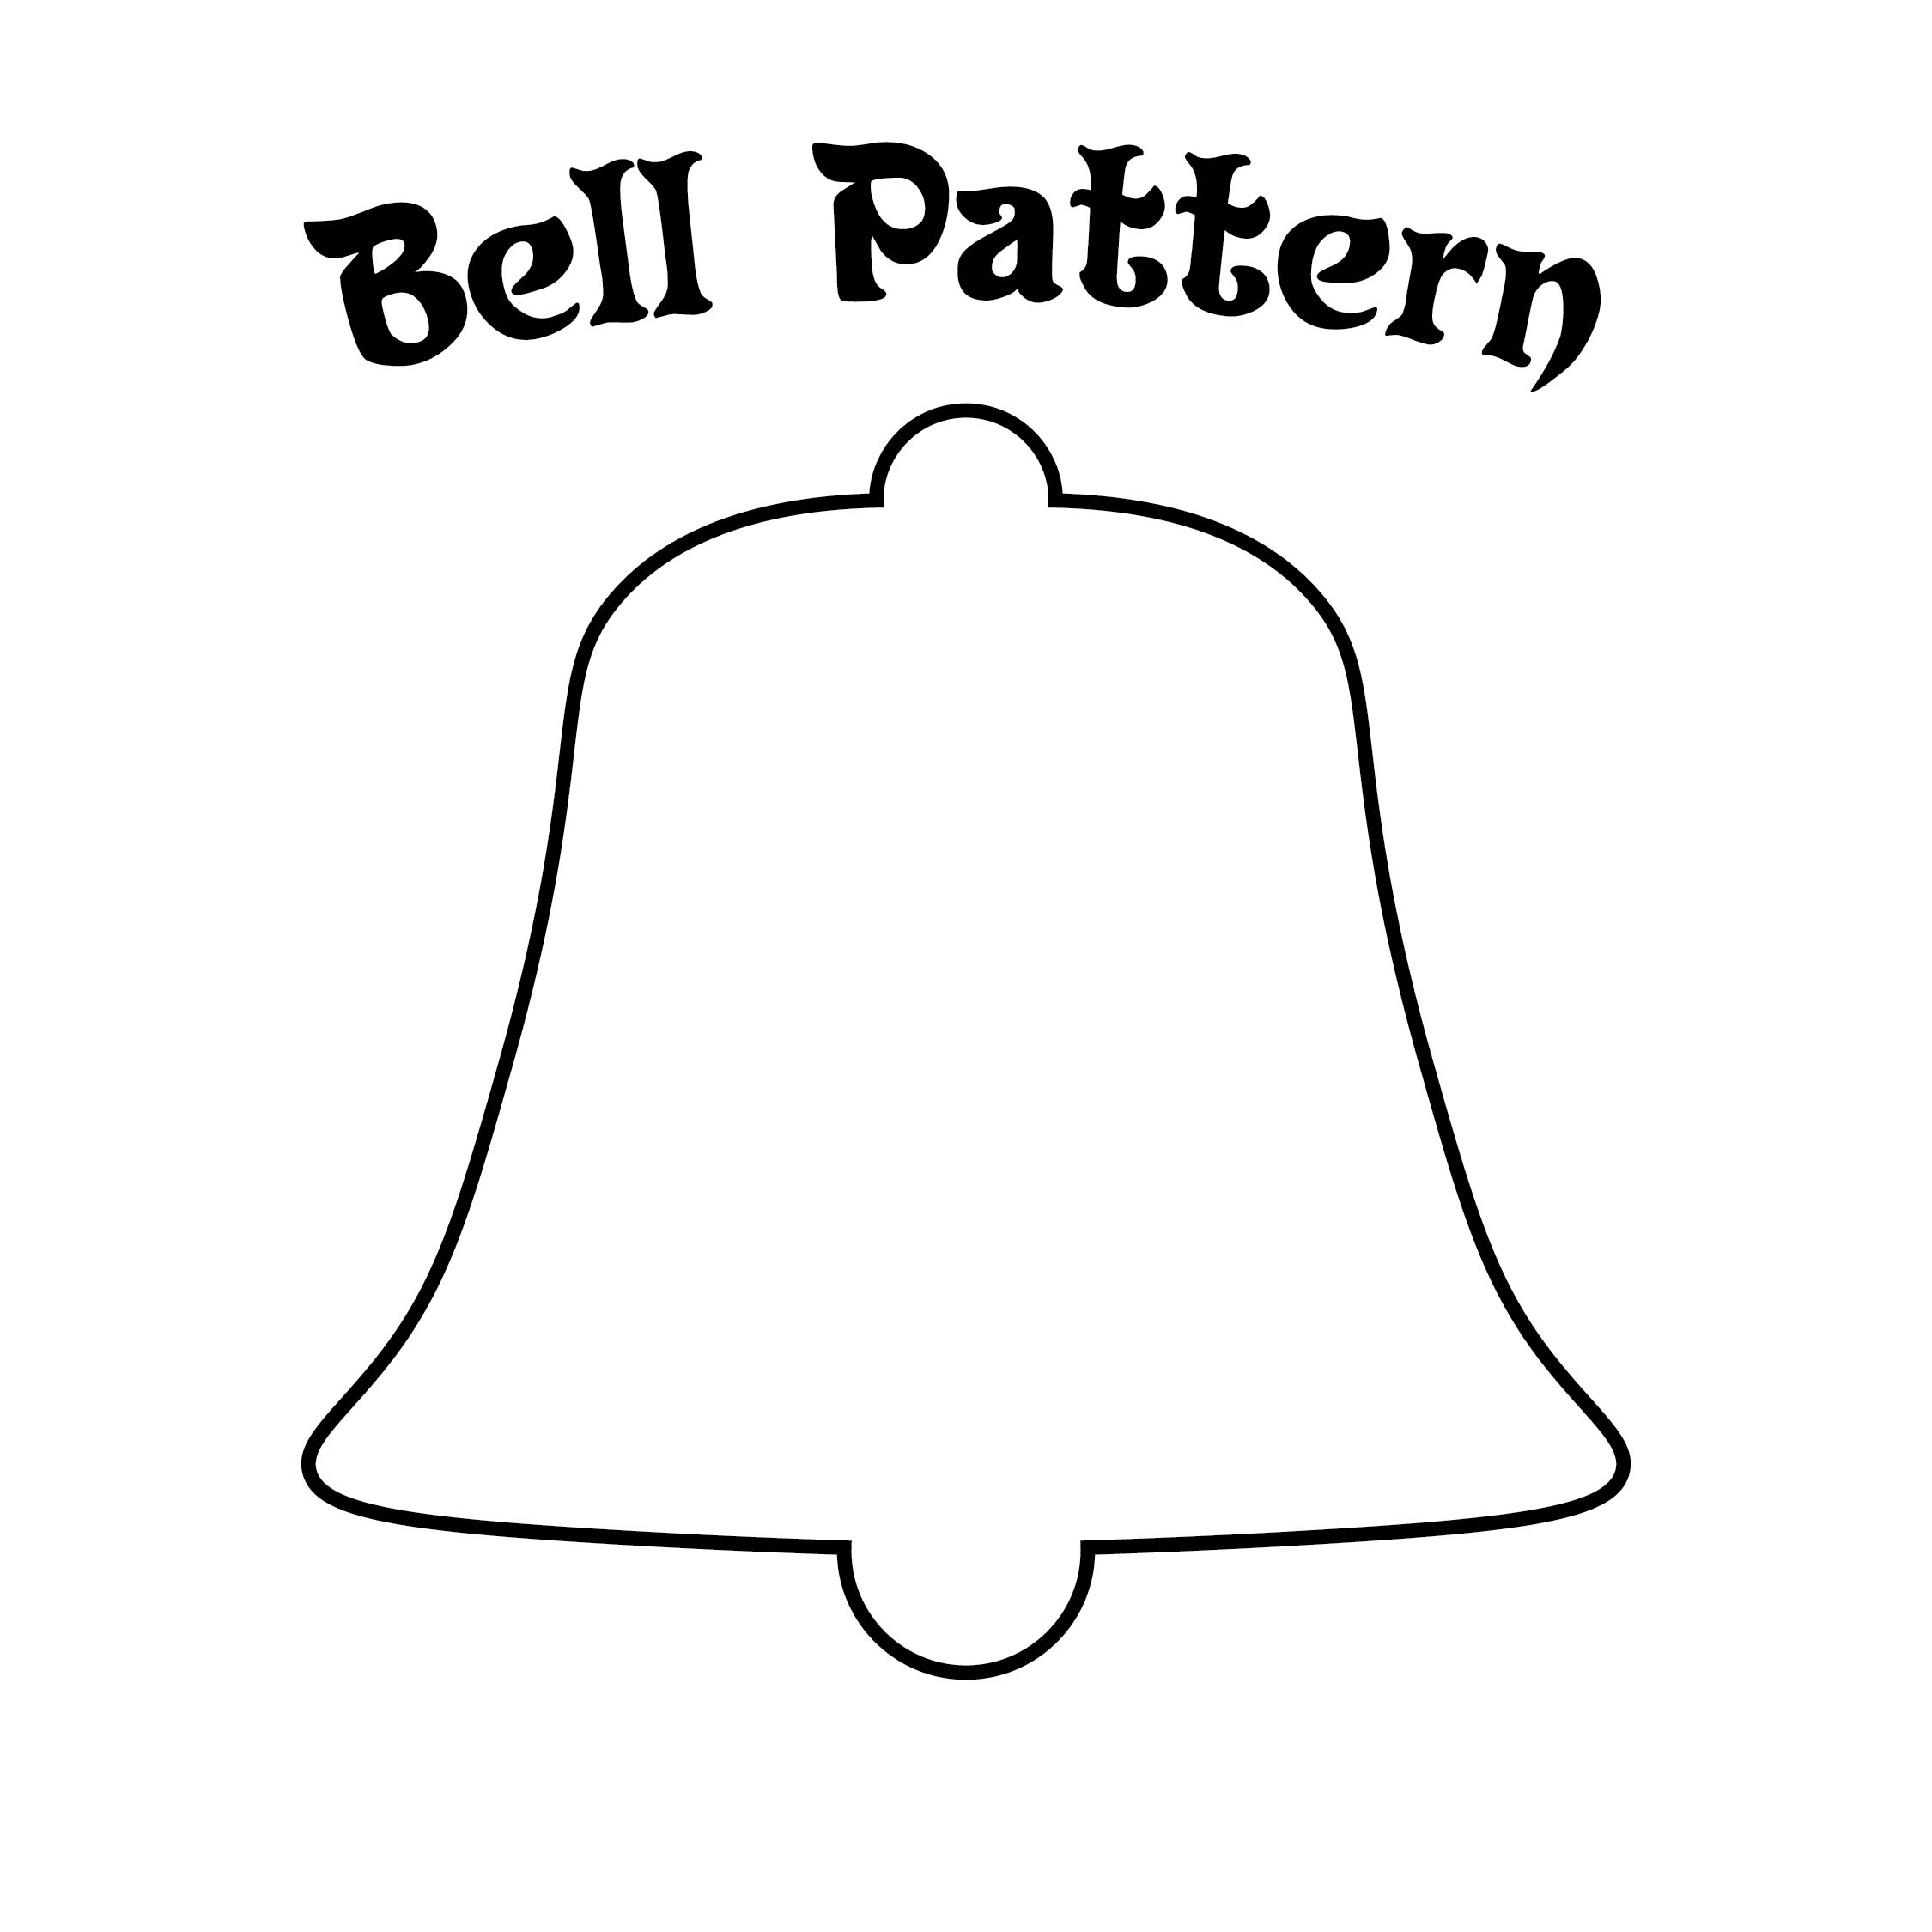 Free Printable Bell Template - Your Daily Printable